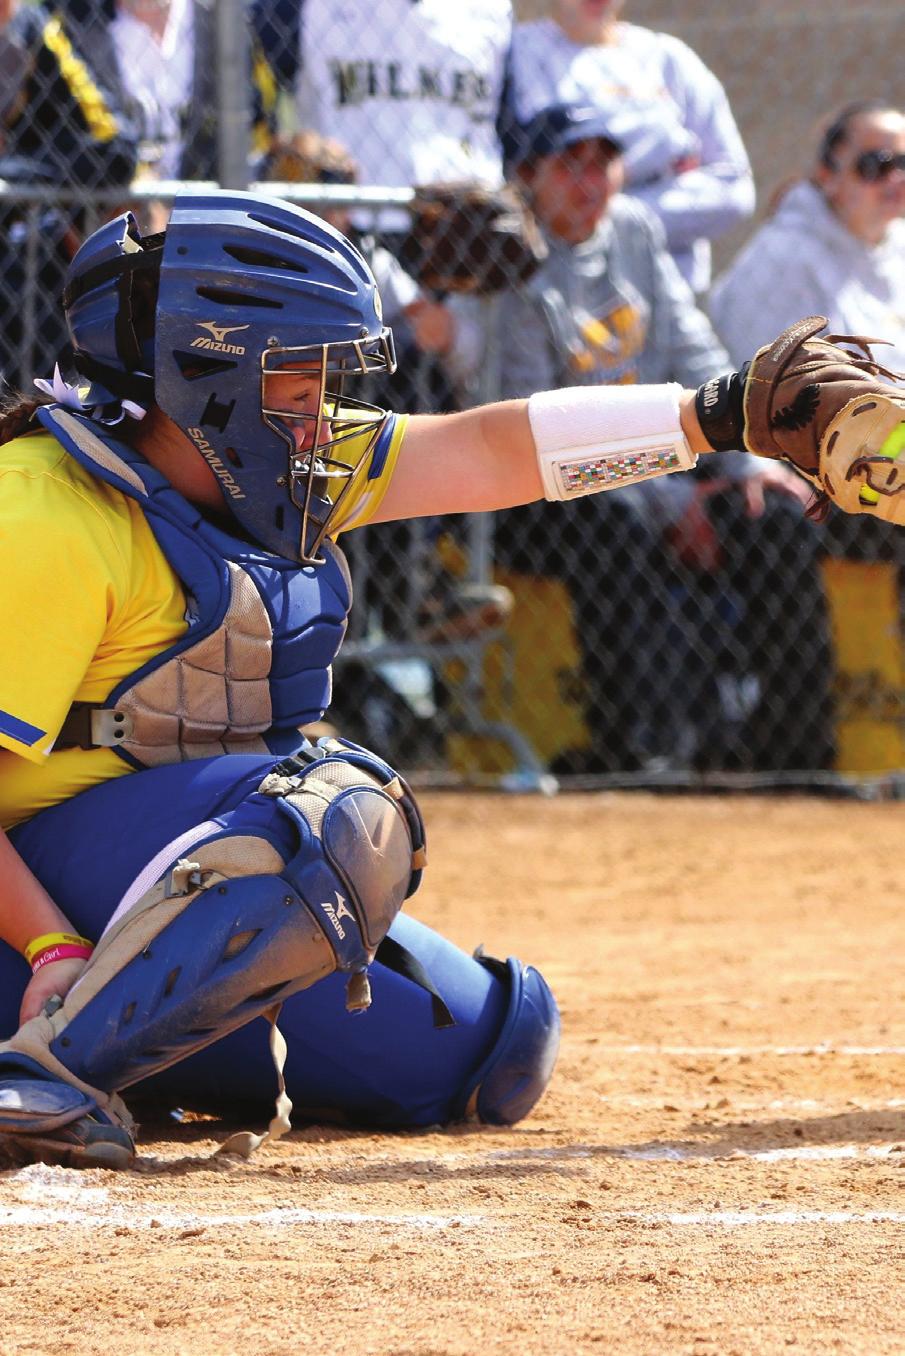 QUALIFIED FOR POST-SEASON 19 TIMES IN 21 YEARS In her second season at the helm, head coach Lindsay Freitag led the Misericordia University softball team to the post-season for the second consecutive